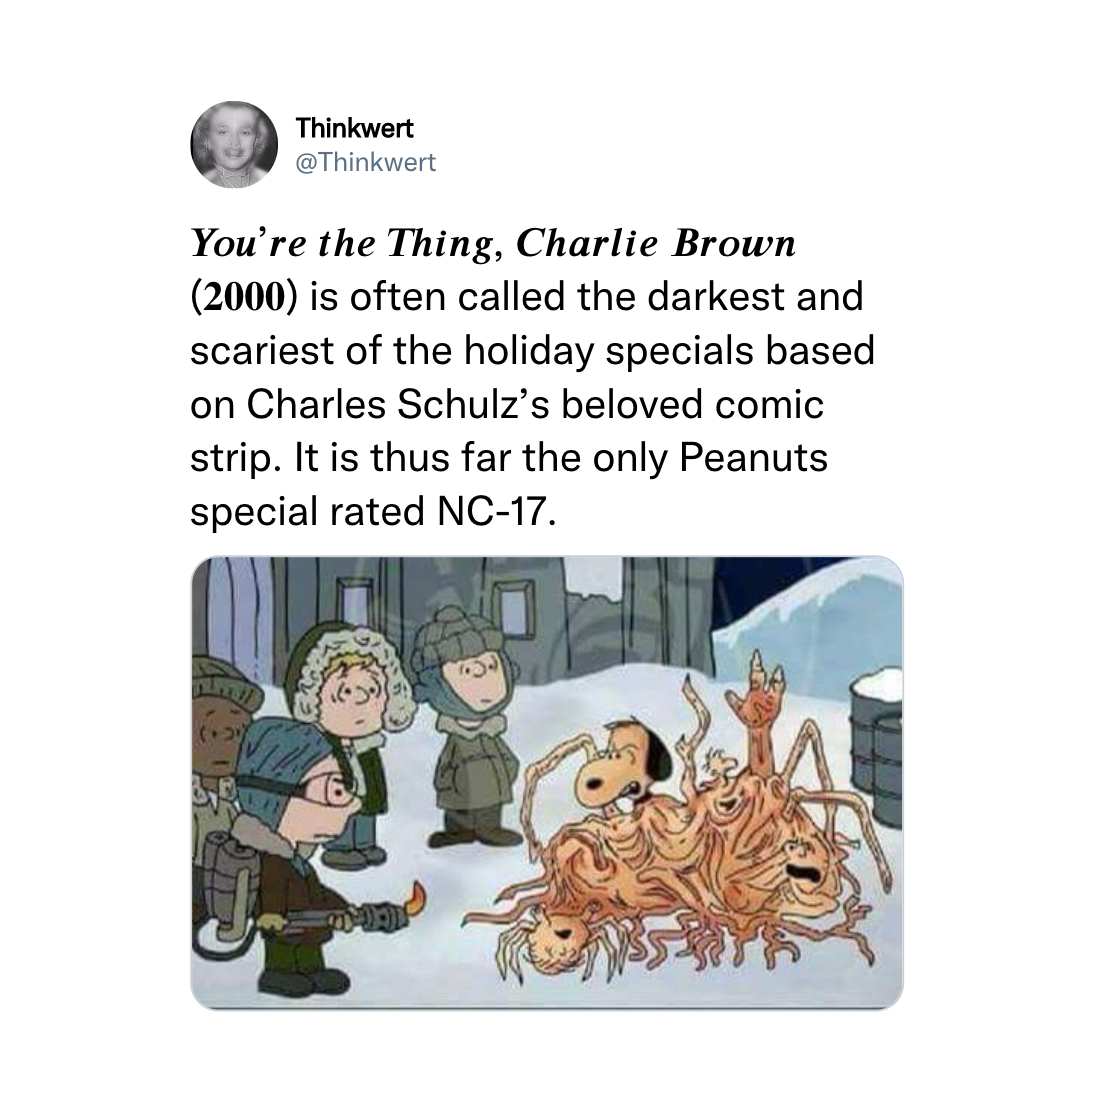 funny tweets - memes charlie brown - Thinkwert You're the Thing, Charlie Brown 2000 is often called the darkest and scariest of the holiday specials based on Charles Schulz's beloved comic strip. It is thus far the only Peanuts special rated Nc17.